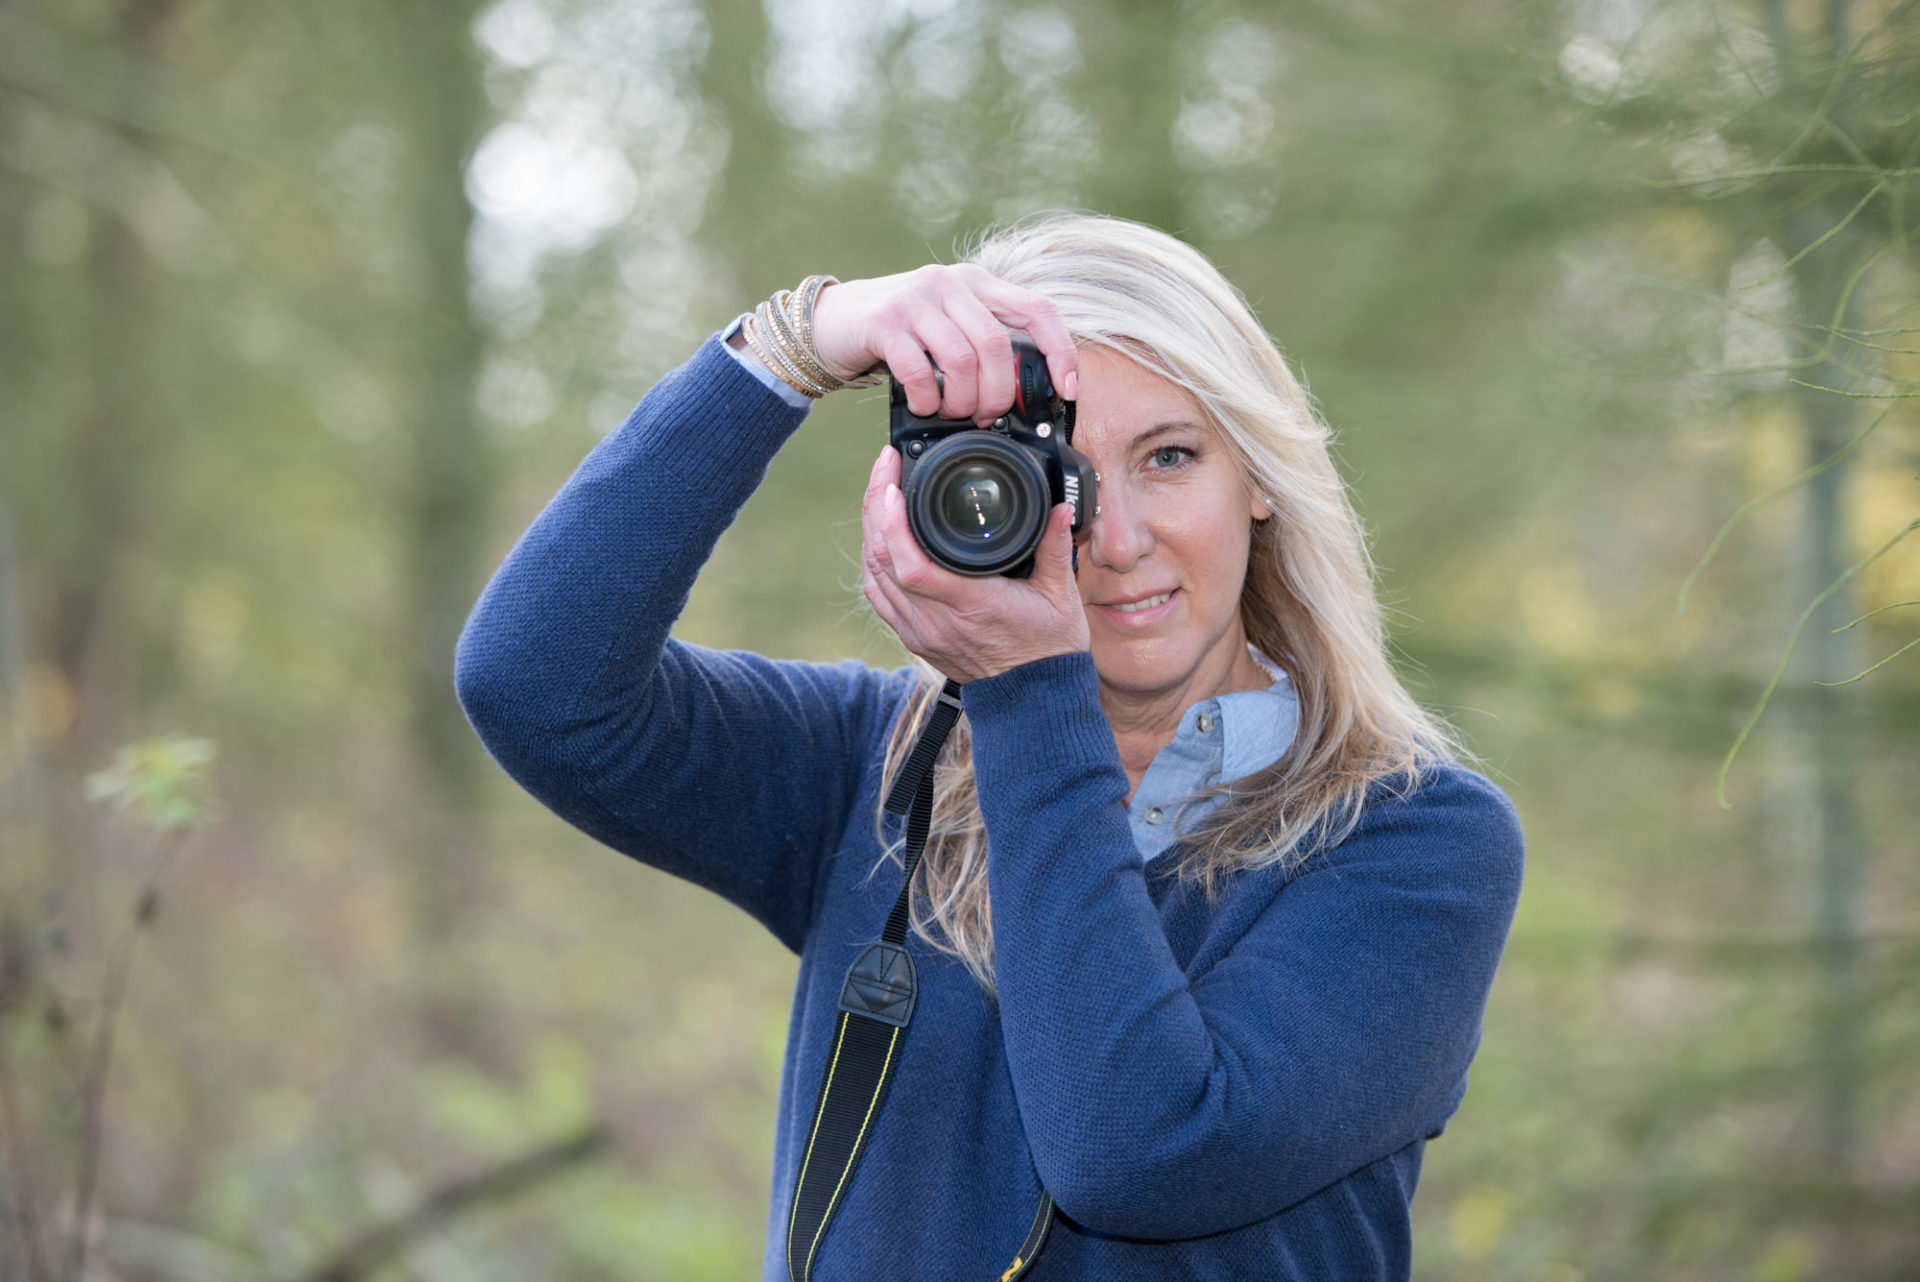 Photography Courses in Oxford gift vouchers available for Christmas